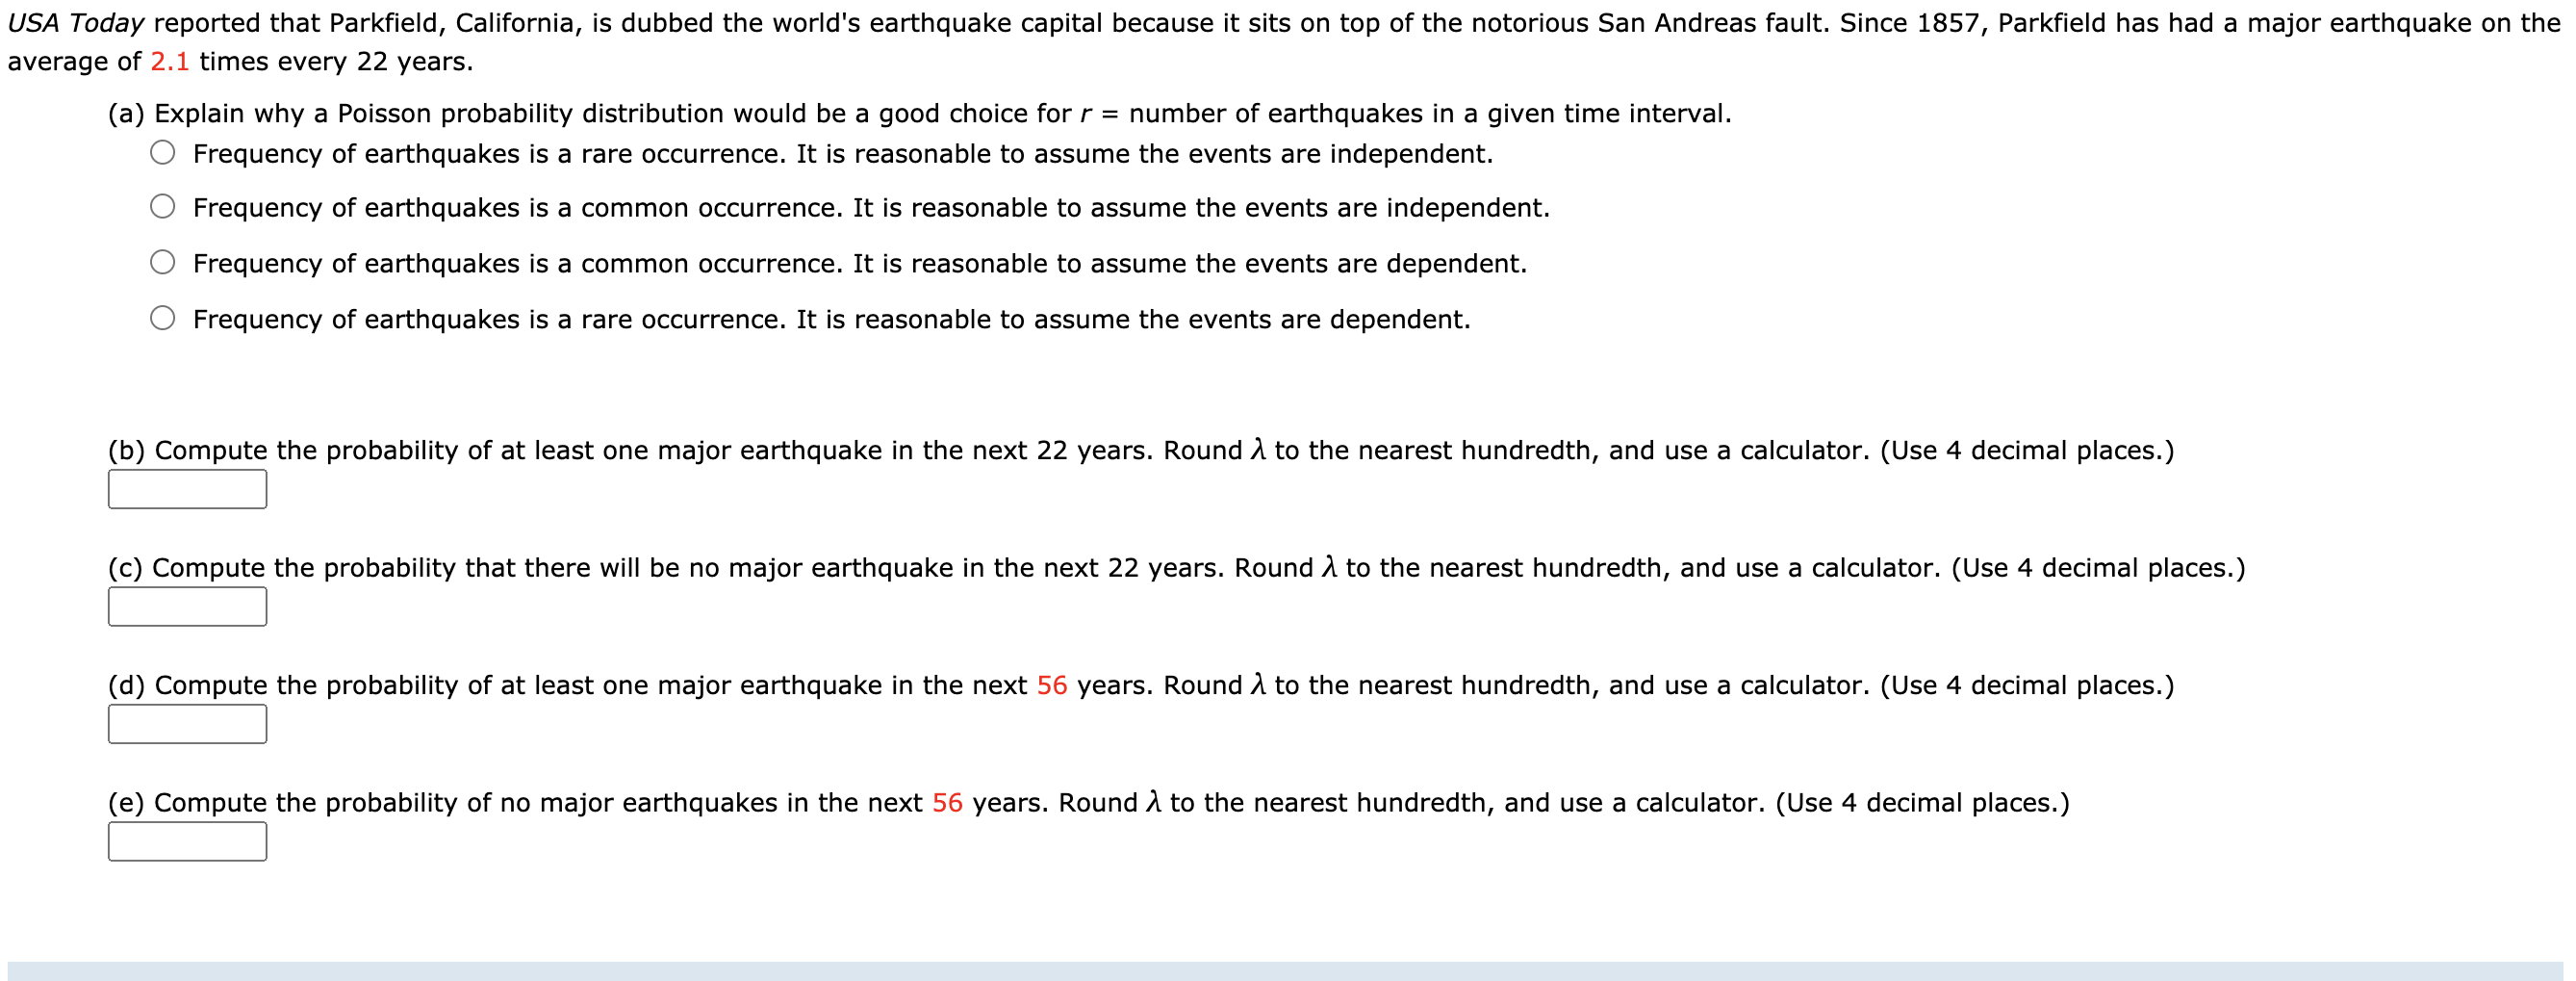 USA Today reported that Parkfield, California, is dubbed the world's earthquake capital because it sits on top of the notorious San Andreas fault. Since 1857, Parkfield has had a major earthquake on the
average of 2.1 times every 22 years.
(a) Explain why a Poisson probability distribution would be a good choice for r = number of earthquakes in a given time interval.
Frequency of earthquakes is a rare occurrence. It is reasonable to assume the events are independent.
Frequency of earthquakes is a common occurrence. It is reasonable to assume the events are independent.
Frequency of earthquakes is a common occurrence. It is reasonable to assume the events are dependent.
Frequency of earthquakes is a rare occurrence. It is reasonable to assume the events are dependent.
(b) Compute the probability of at least one major earthquake in the next 22 years. Round A to the nearest hundredth, and use a calculator. (Use 4 decimal places.)
(c) Compute the probability that there will be no major earthquake in the next 22 years. Round A to the nearest hundredth, and use a calculator. (Use 4 decimal places.)
(d) Compute the probability of at least one major earthquake in the next 56 years. Round A to the nearest hundredth, and use a calculator. (Use 4 decimal places.)
(e) Compute the probability of no major earthquakes in the next 56 years. Round A to the nearest hundredth, and use a calculator. (Use 4 decimal places.)
